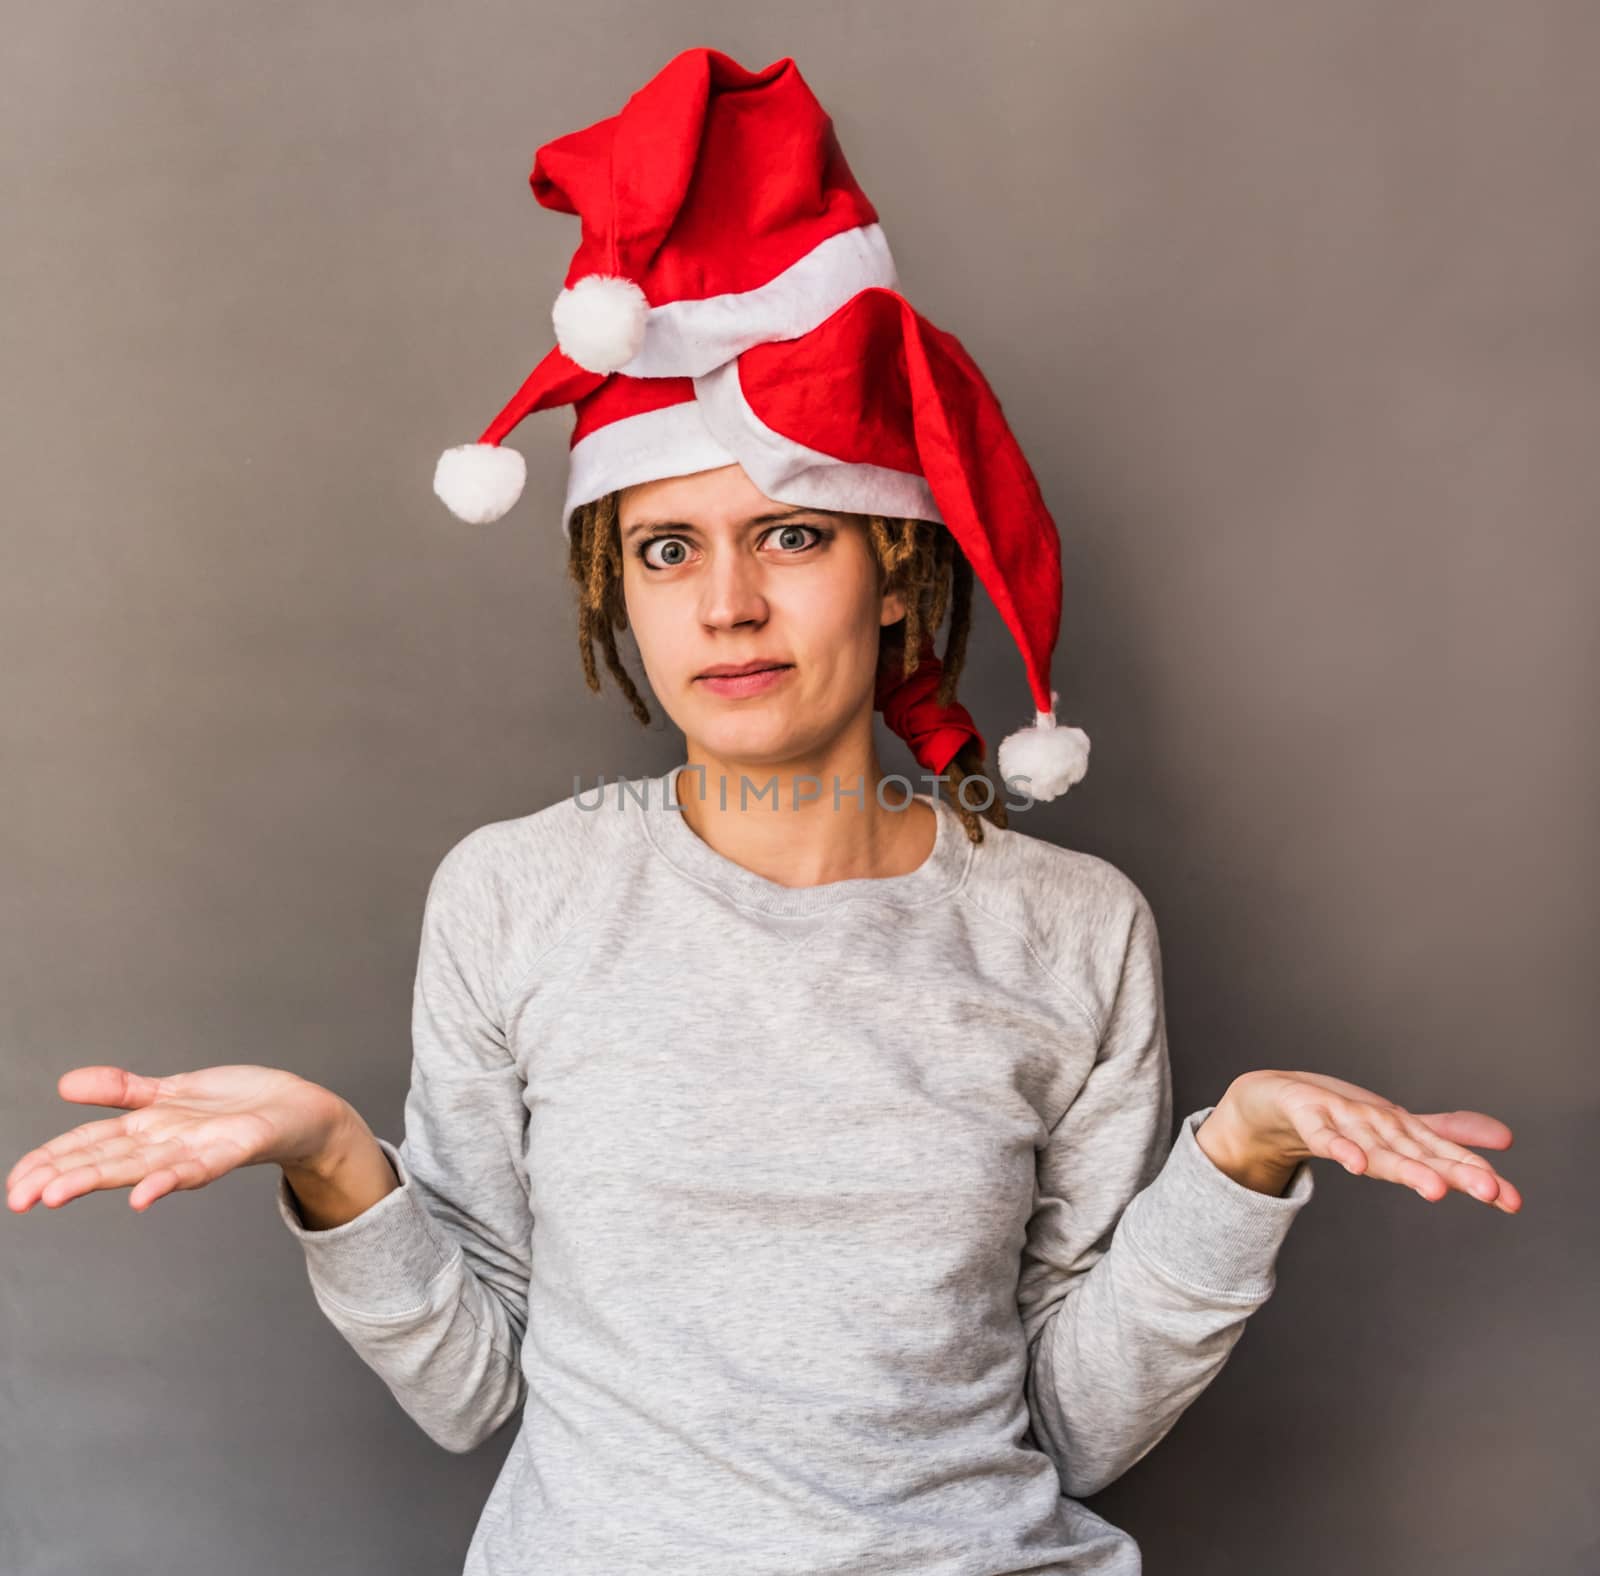 Woman with afro hair in tree santa hats shrugging her shoulders by Desperada